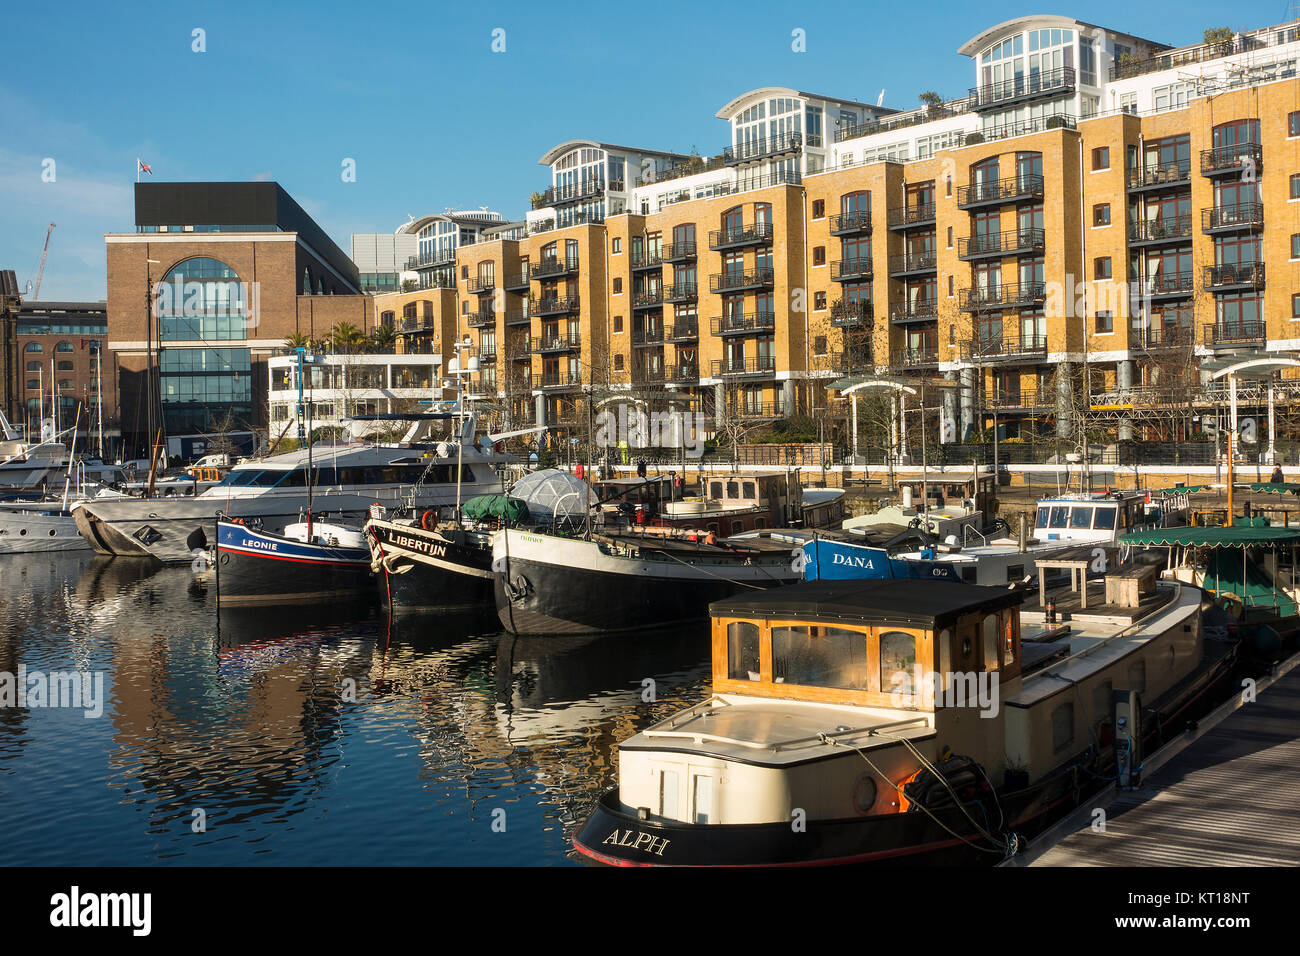 Luxury Boats Moored and Docked in the Safety of St Katharine Dock with Reflections on Water Tower Hamlets London England United Kingdom UK Stock Photo